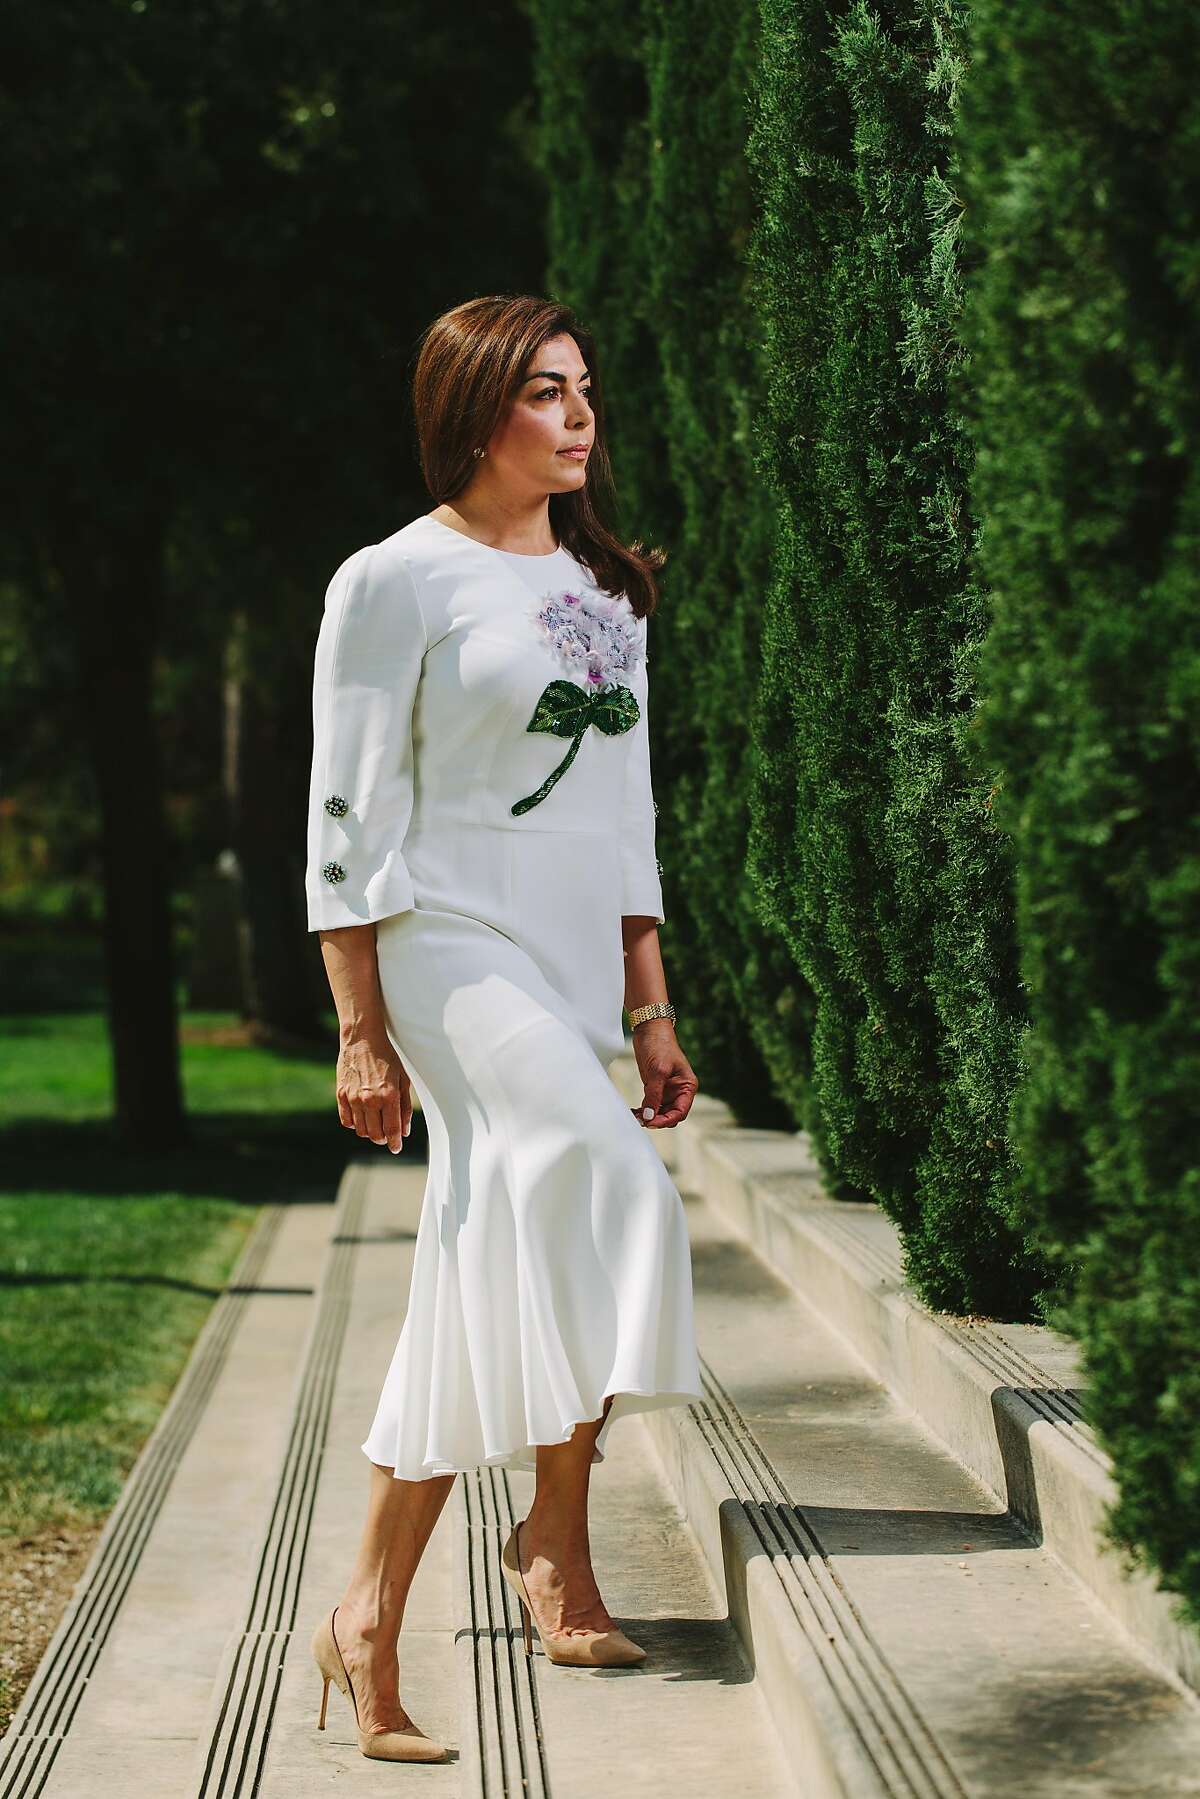 Sara Abbasi photographed in the Rodin Sculpture Garden at the Cantor Arts Center at Stanford University on August 22nd, 2017. Dress by Dolce & Gabbana.